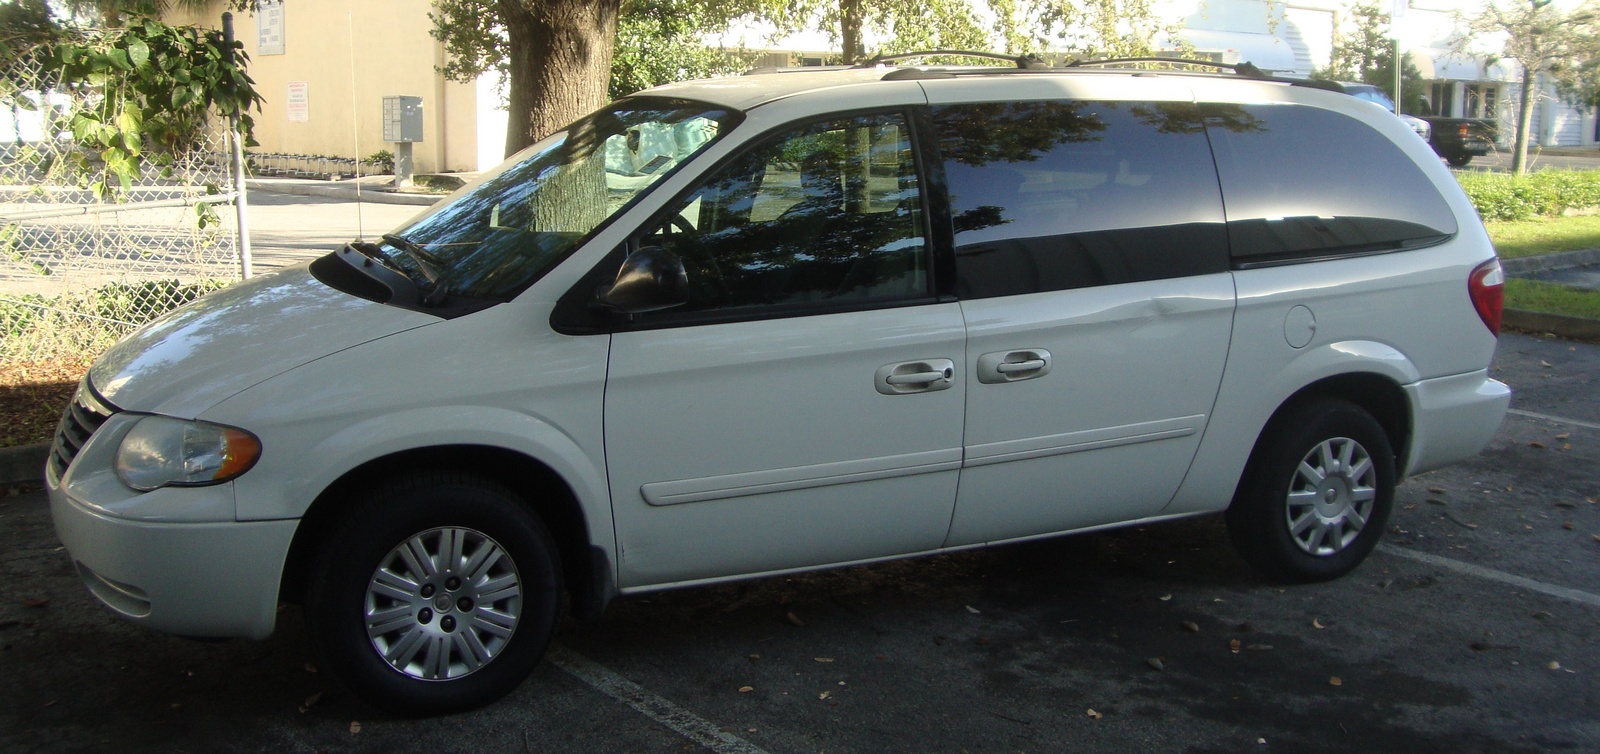 2005 Chrysler town and country pics #2